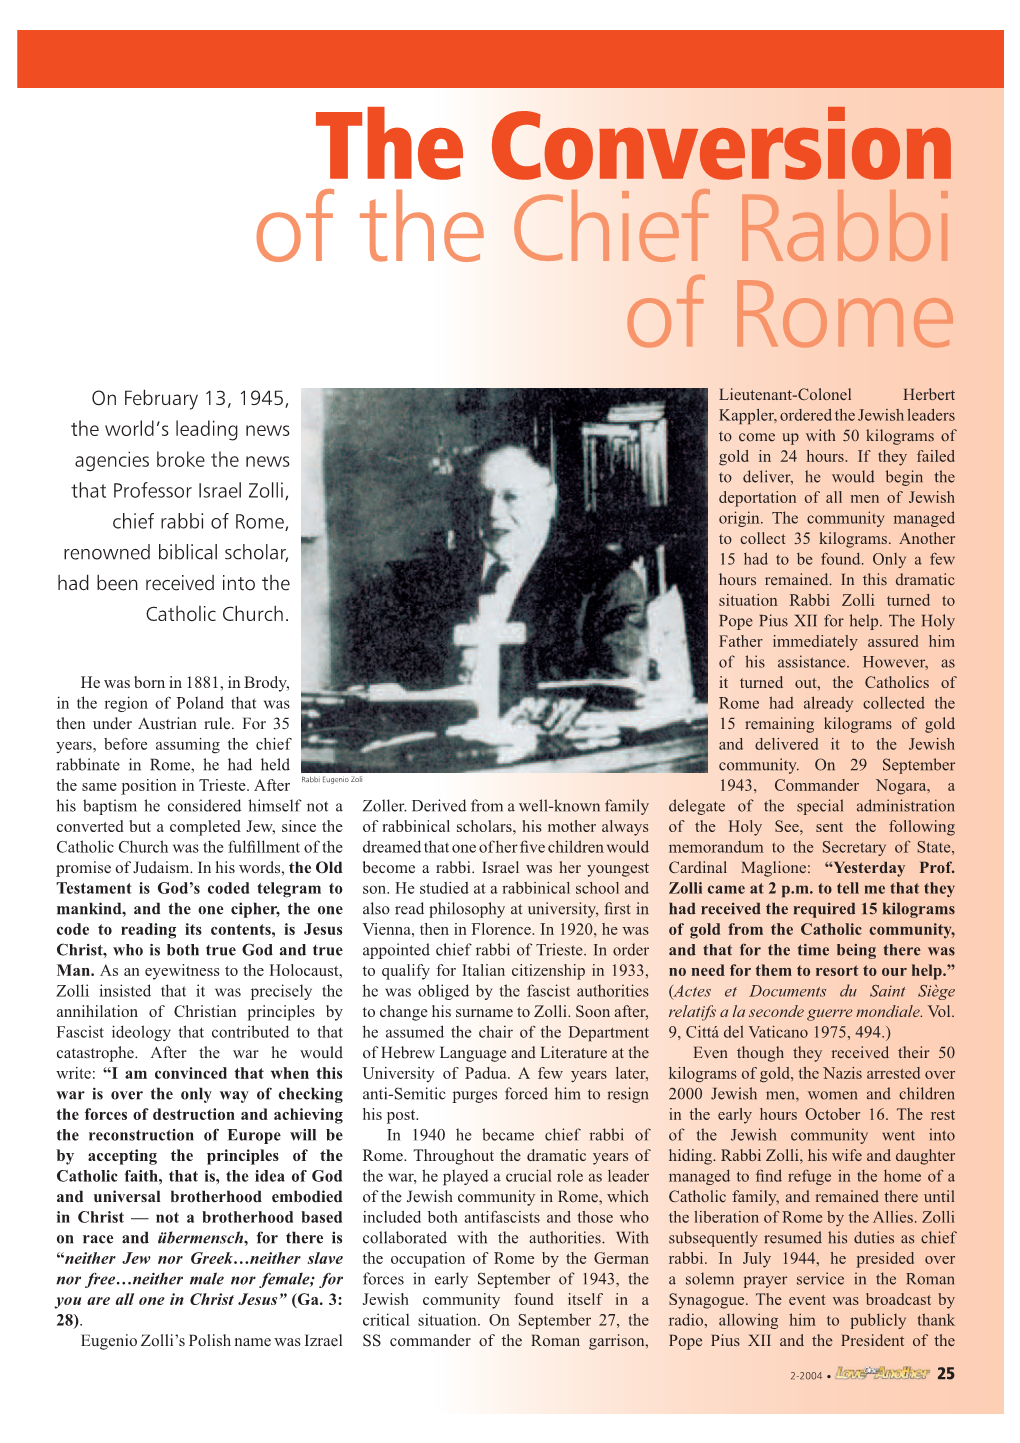 The Conversion of the Chief Rabbi of Rome